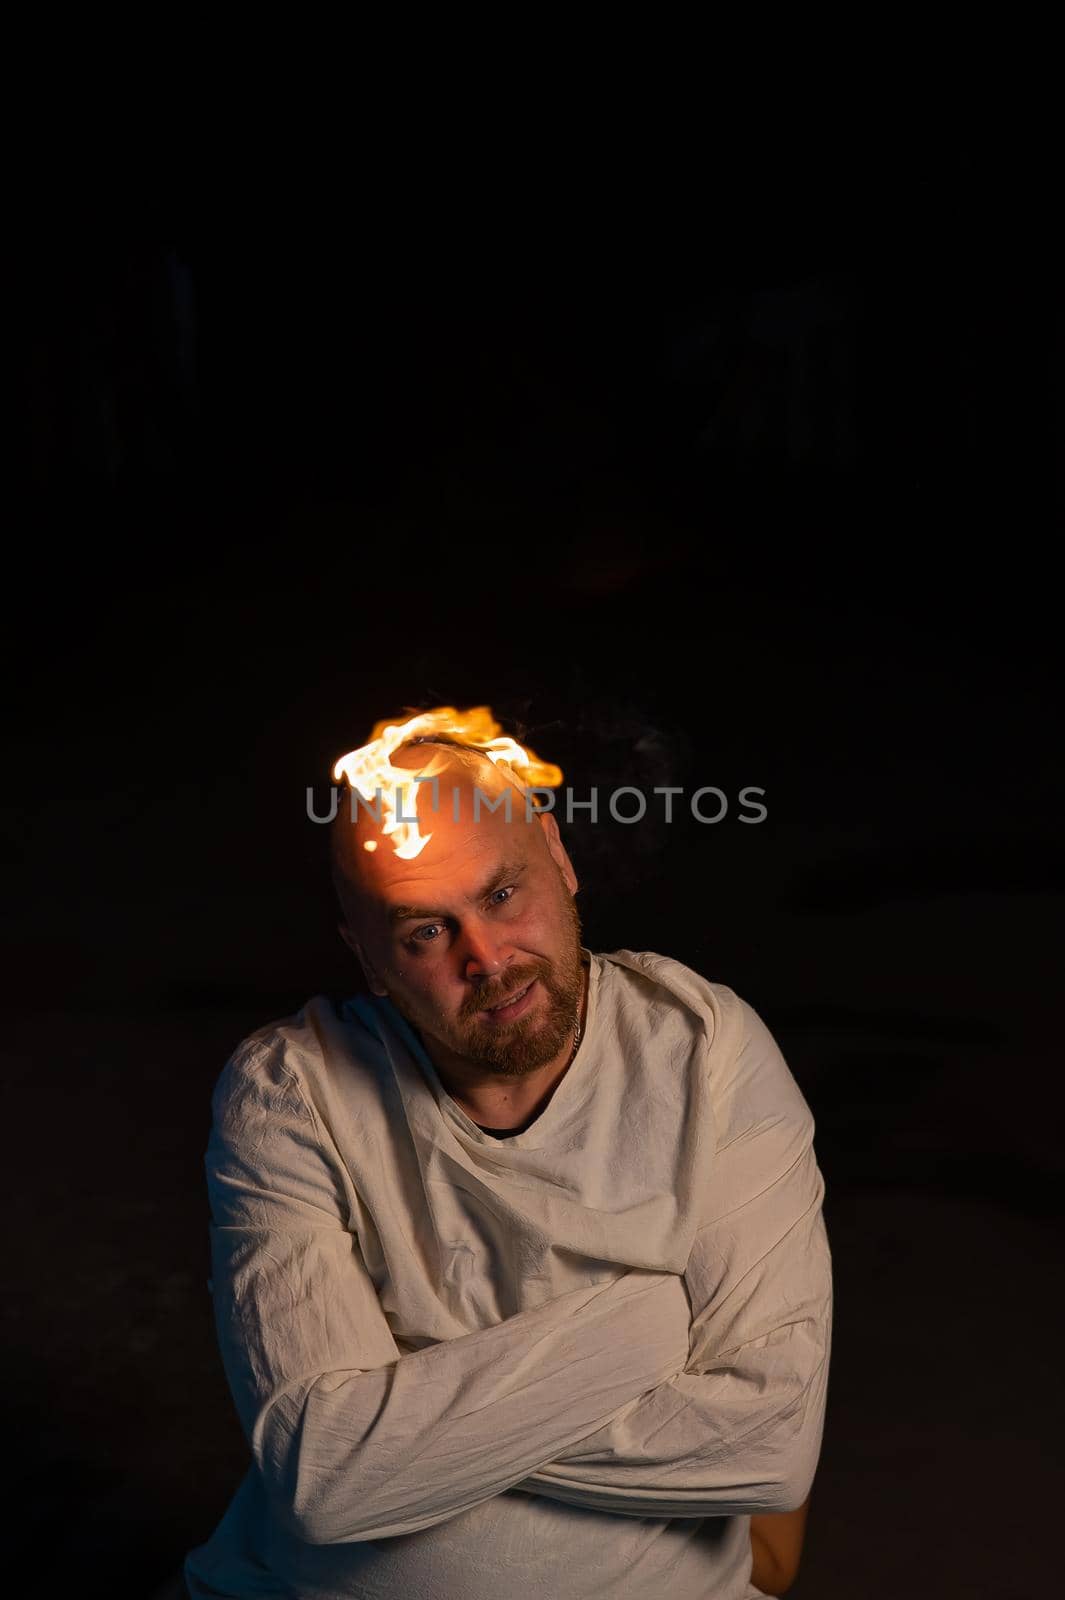 Bald man in a straitjacket with a burning head on a dark background. by mrwed54